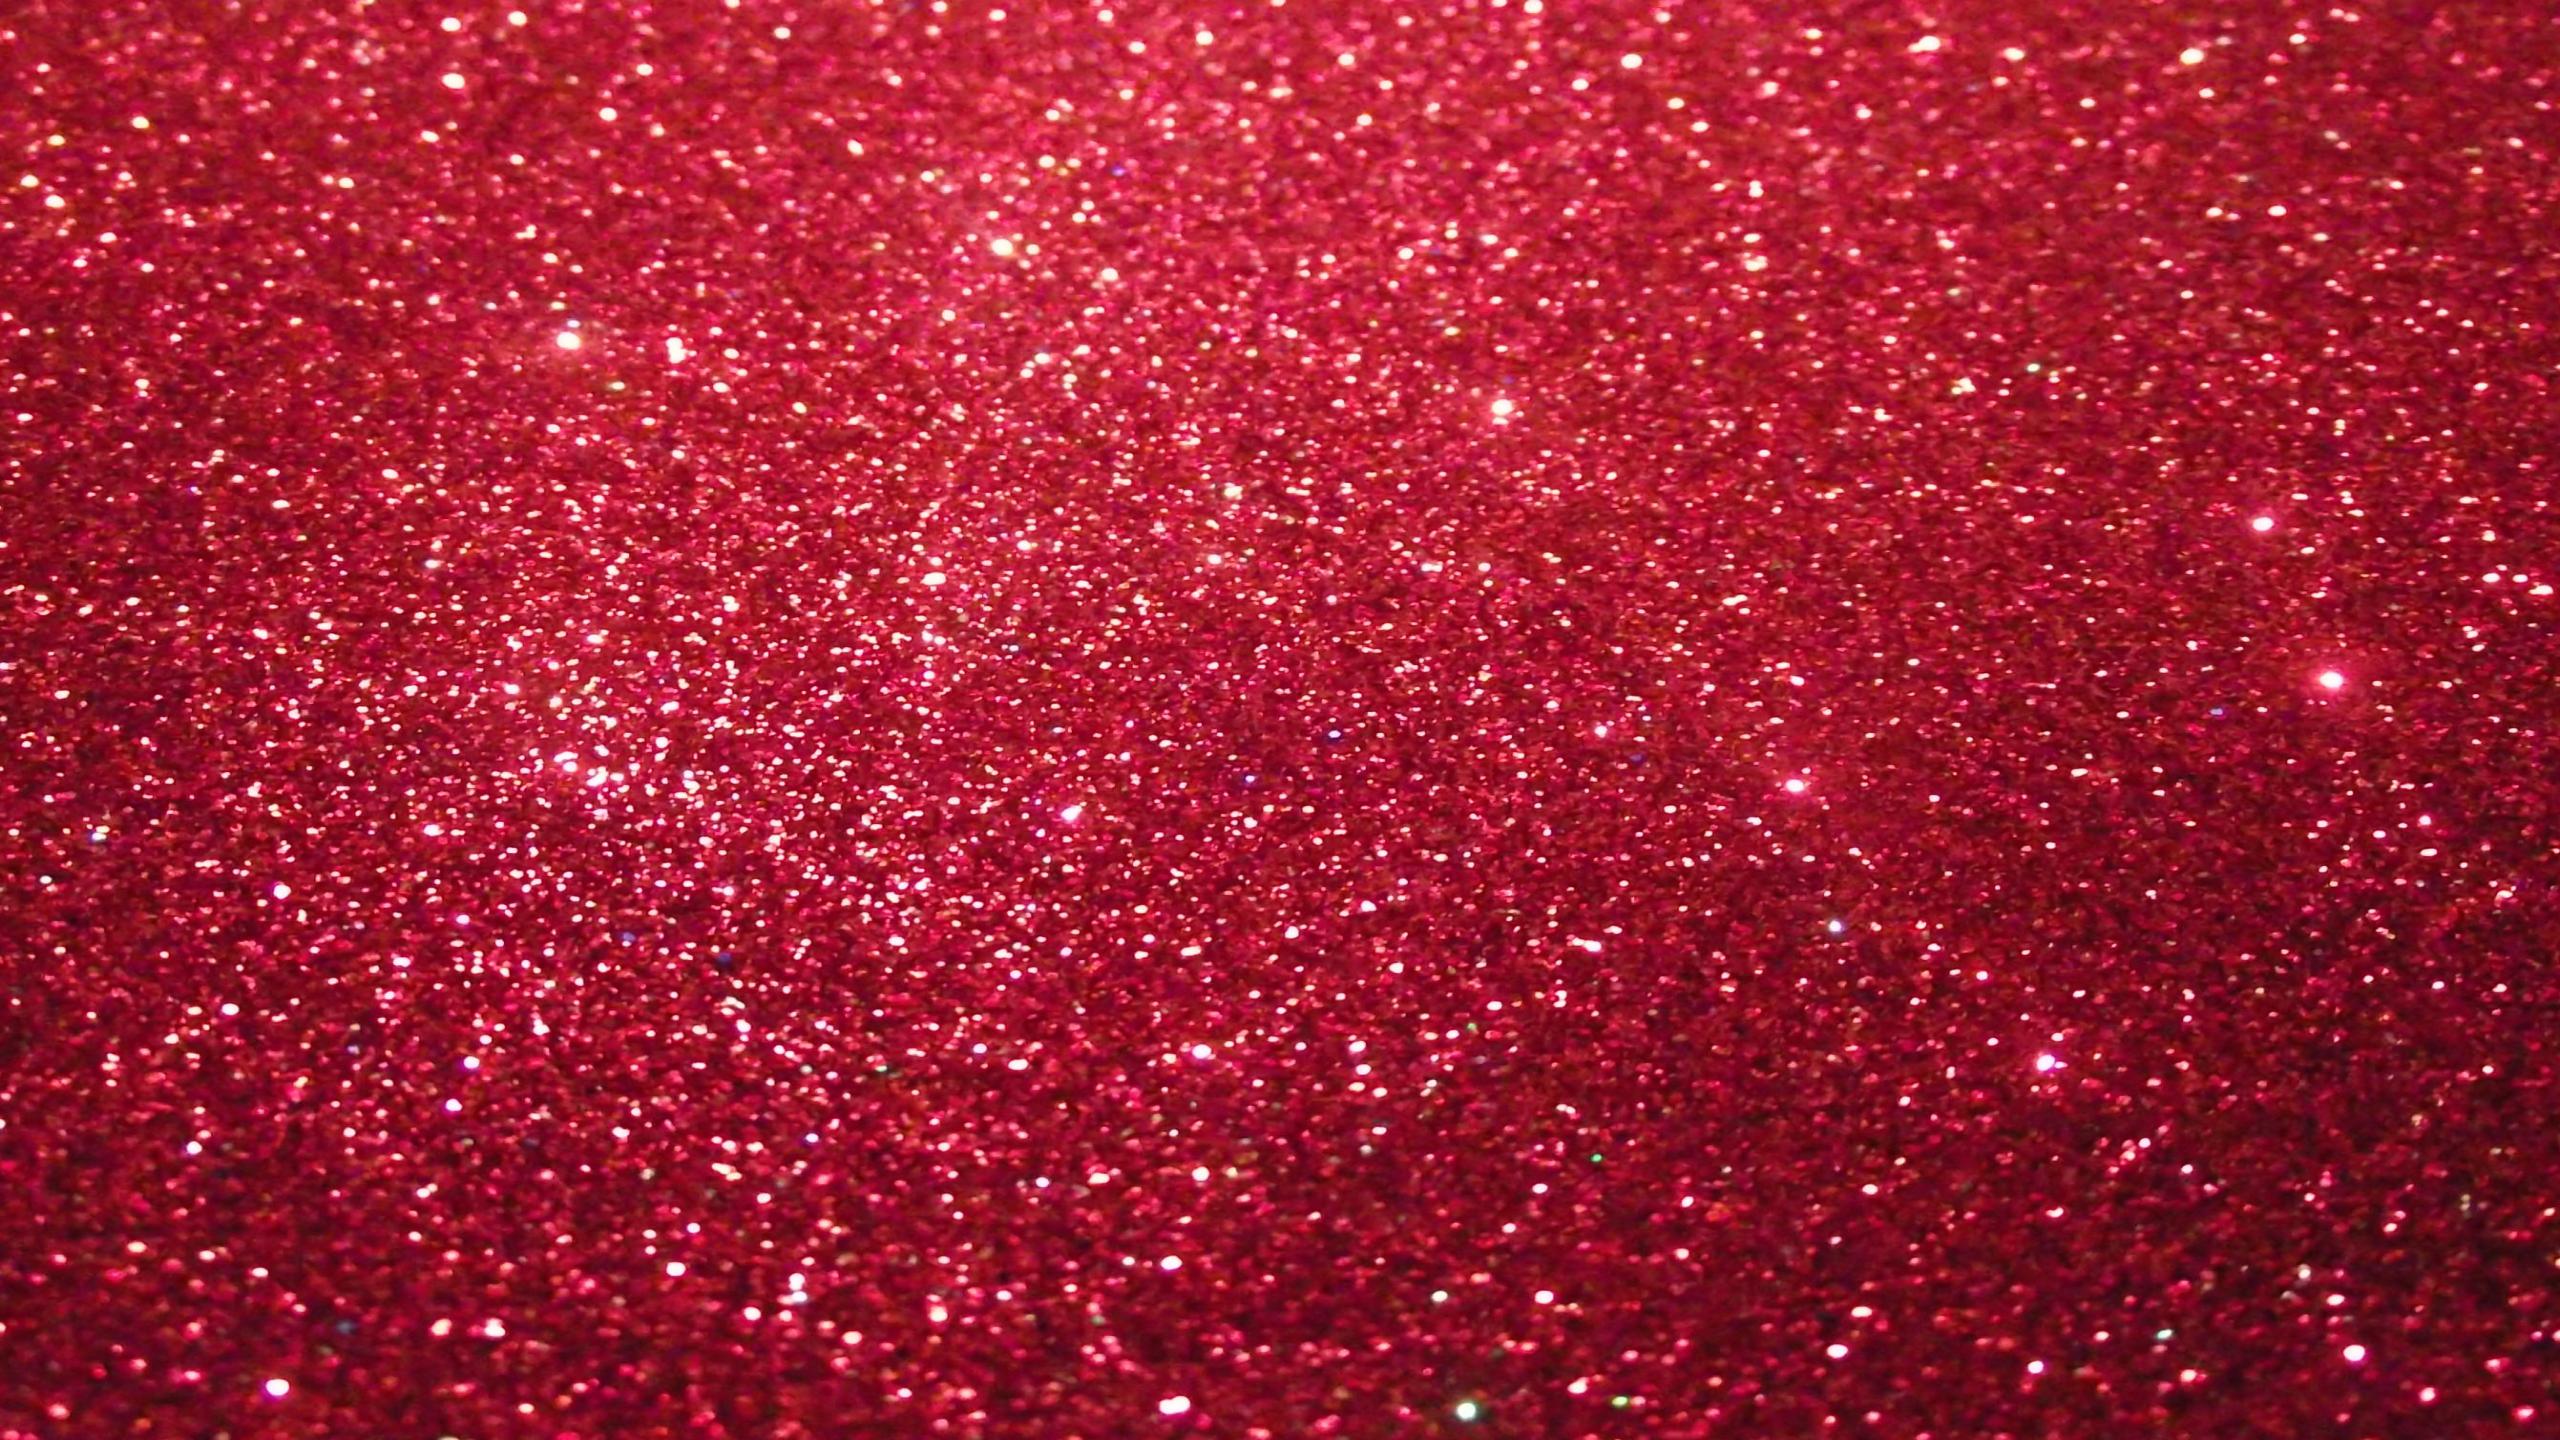 Free download red glitter background image size 1024x760px violet glitter [2560x1440] for your Desktop, Mobile & Tablet. Explore Red Glitter Wallpaper. Free Glitter Wallpaper Background, Glitter Wallpaper for Walls